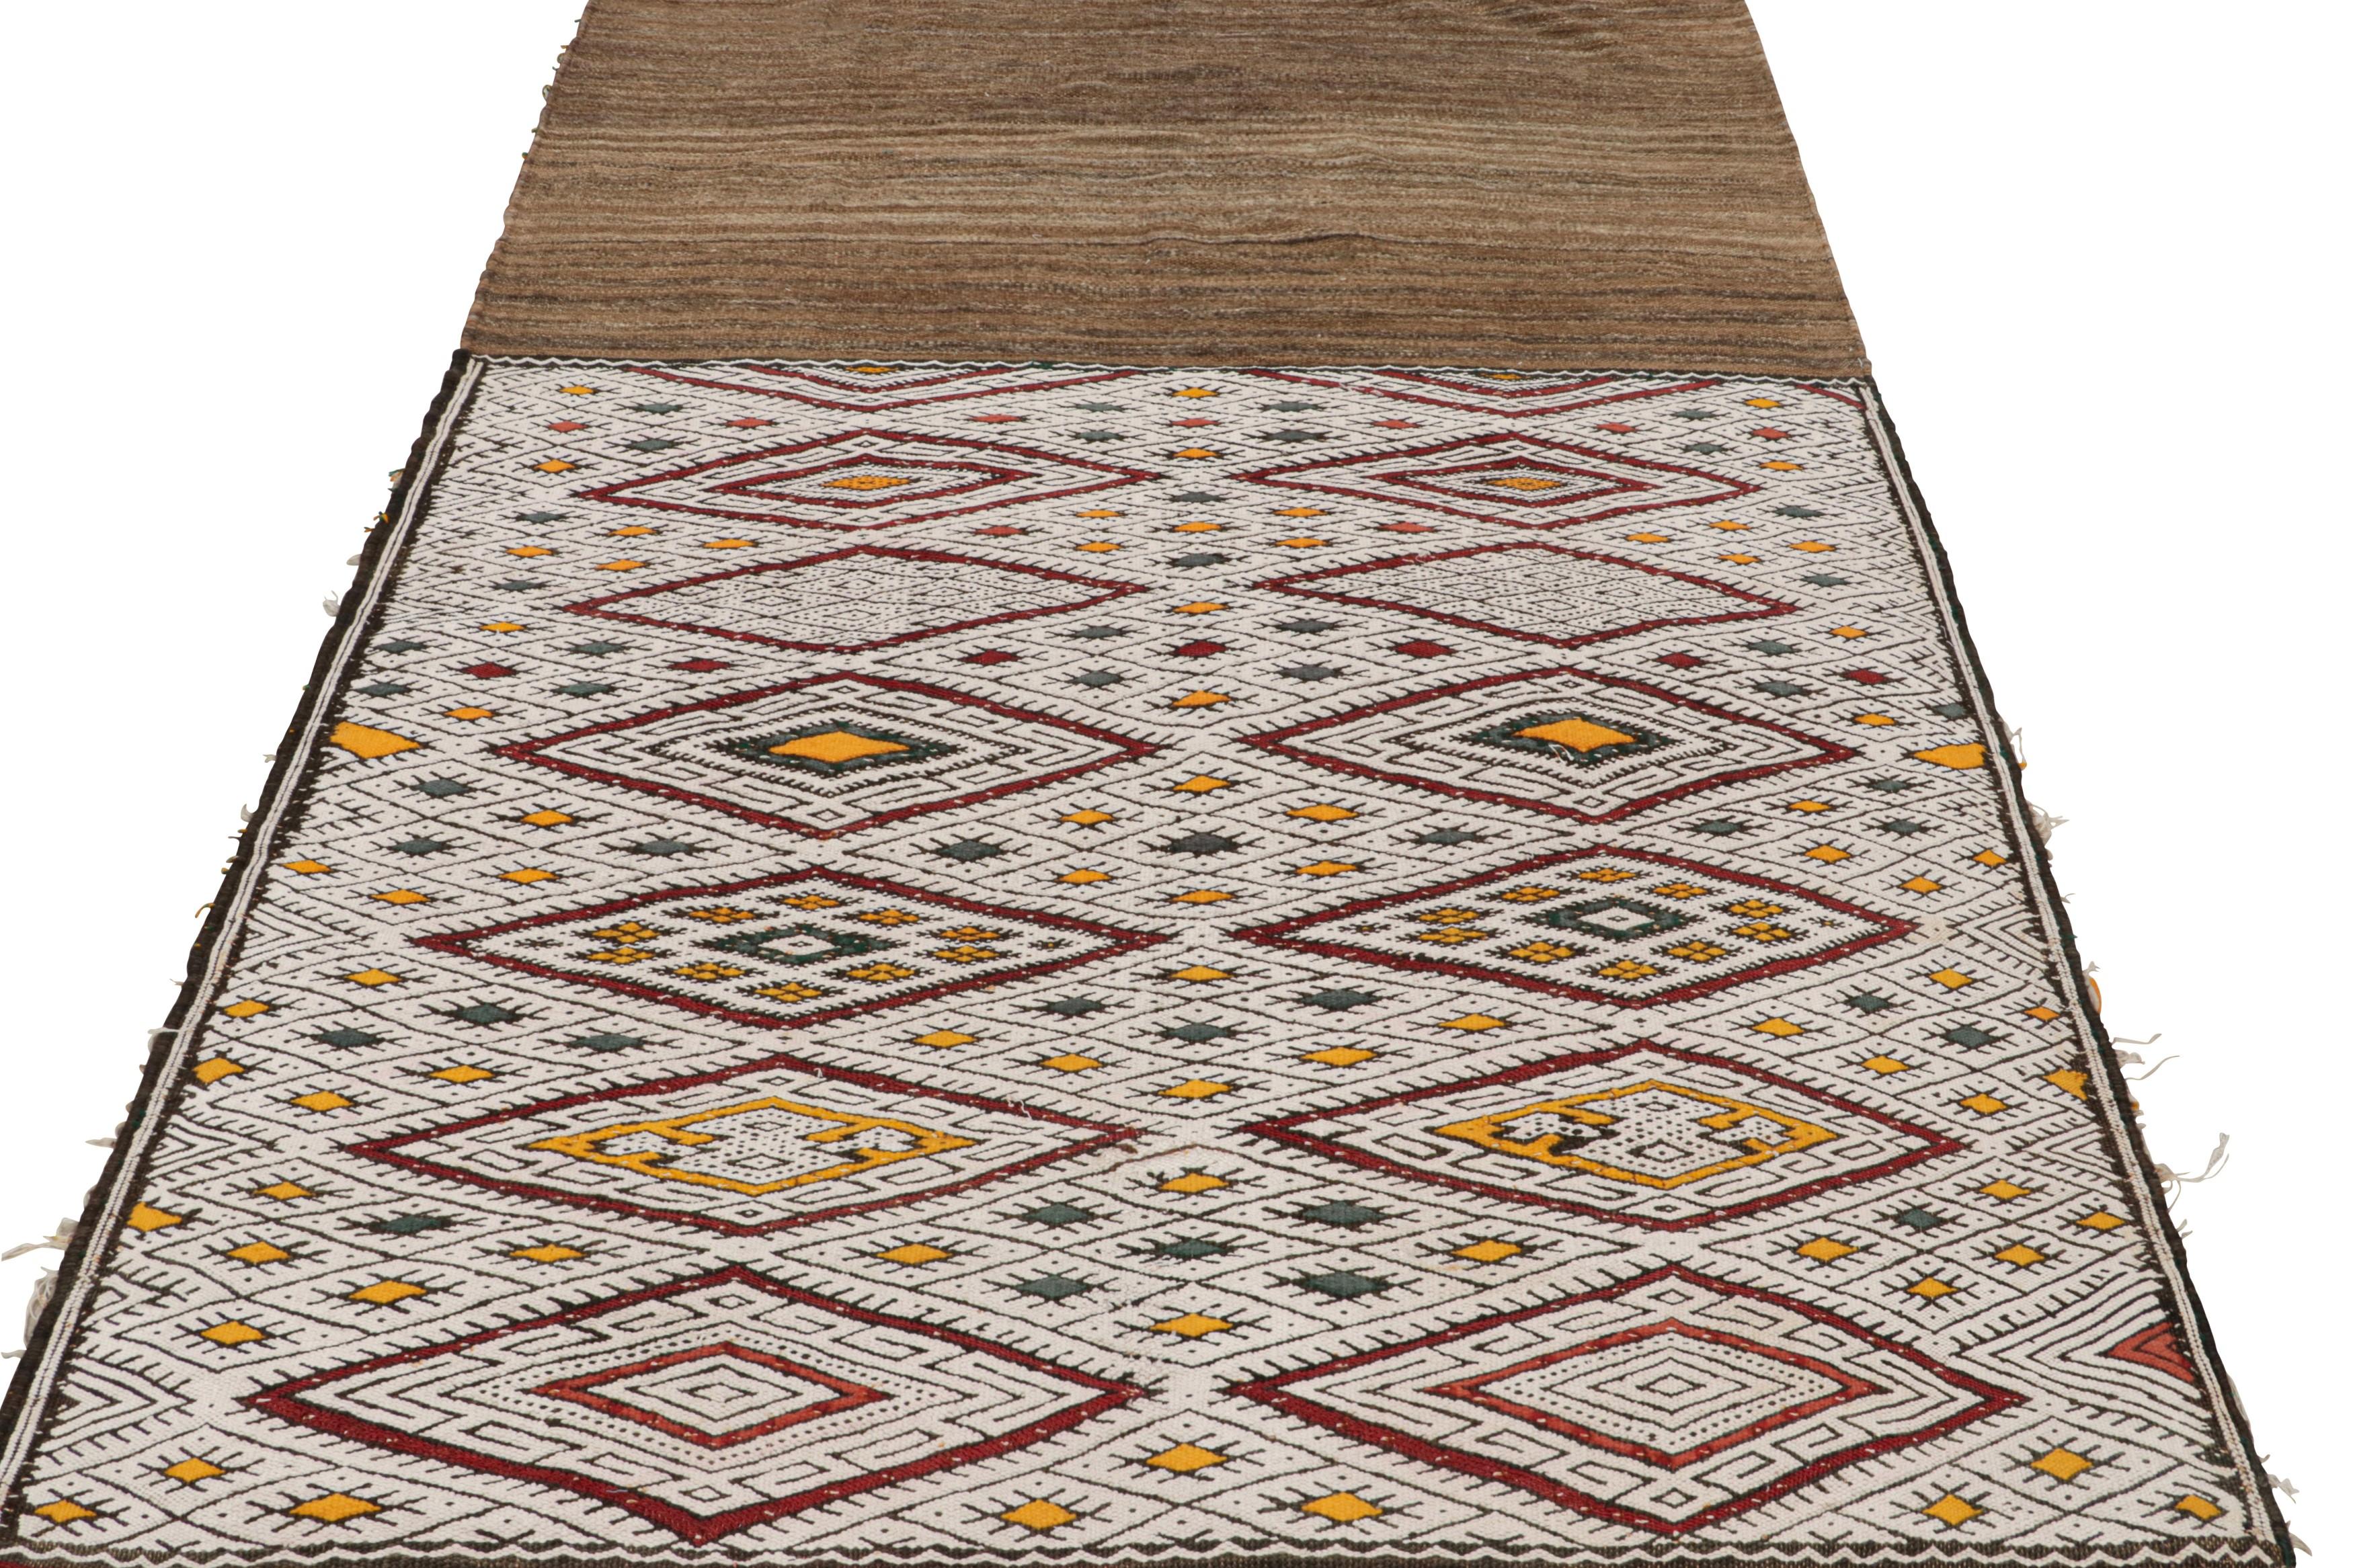 Hand-Woven Vintage Zayane Moroccan Kilim with Polychromatic Tribal Patterns by Rug & Kilim For Sale